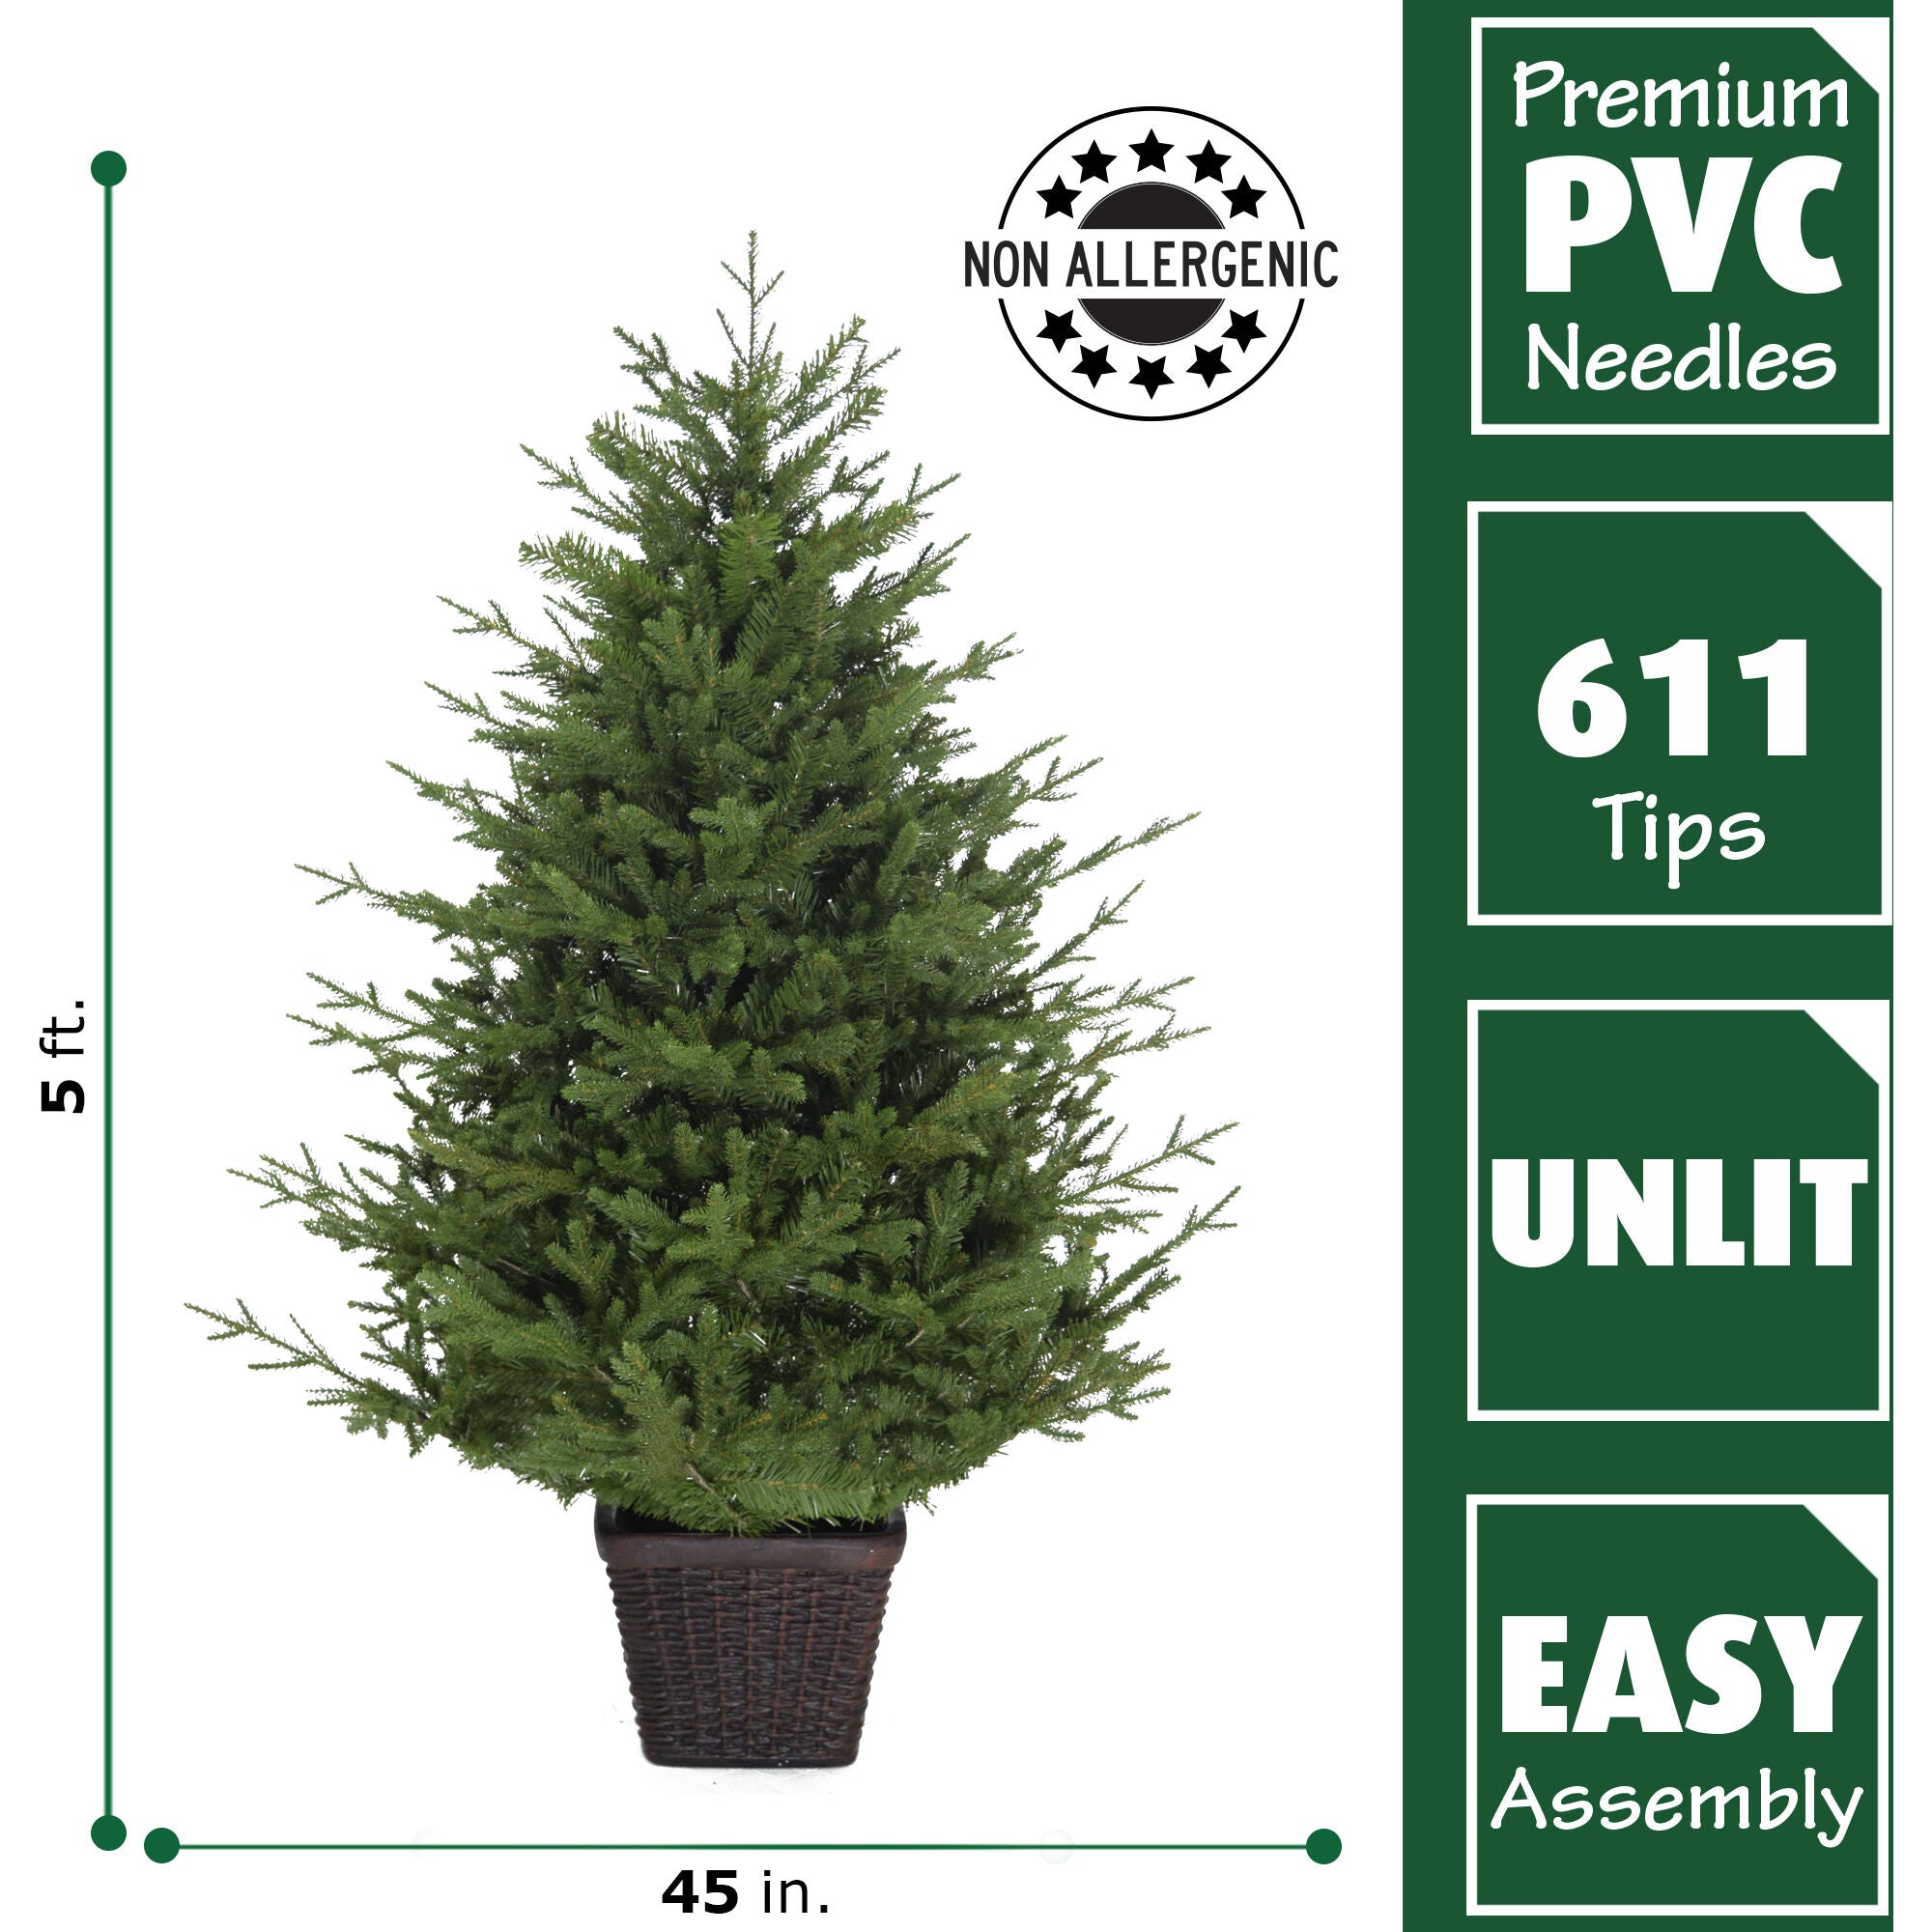 Fraser Hill Farm -  5.0-Ft Adirondack Potted Christmas Tree Décor